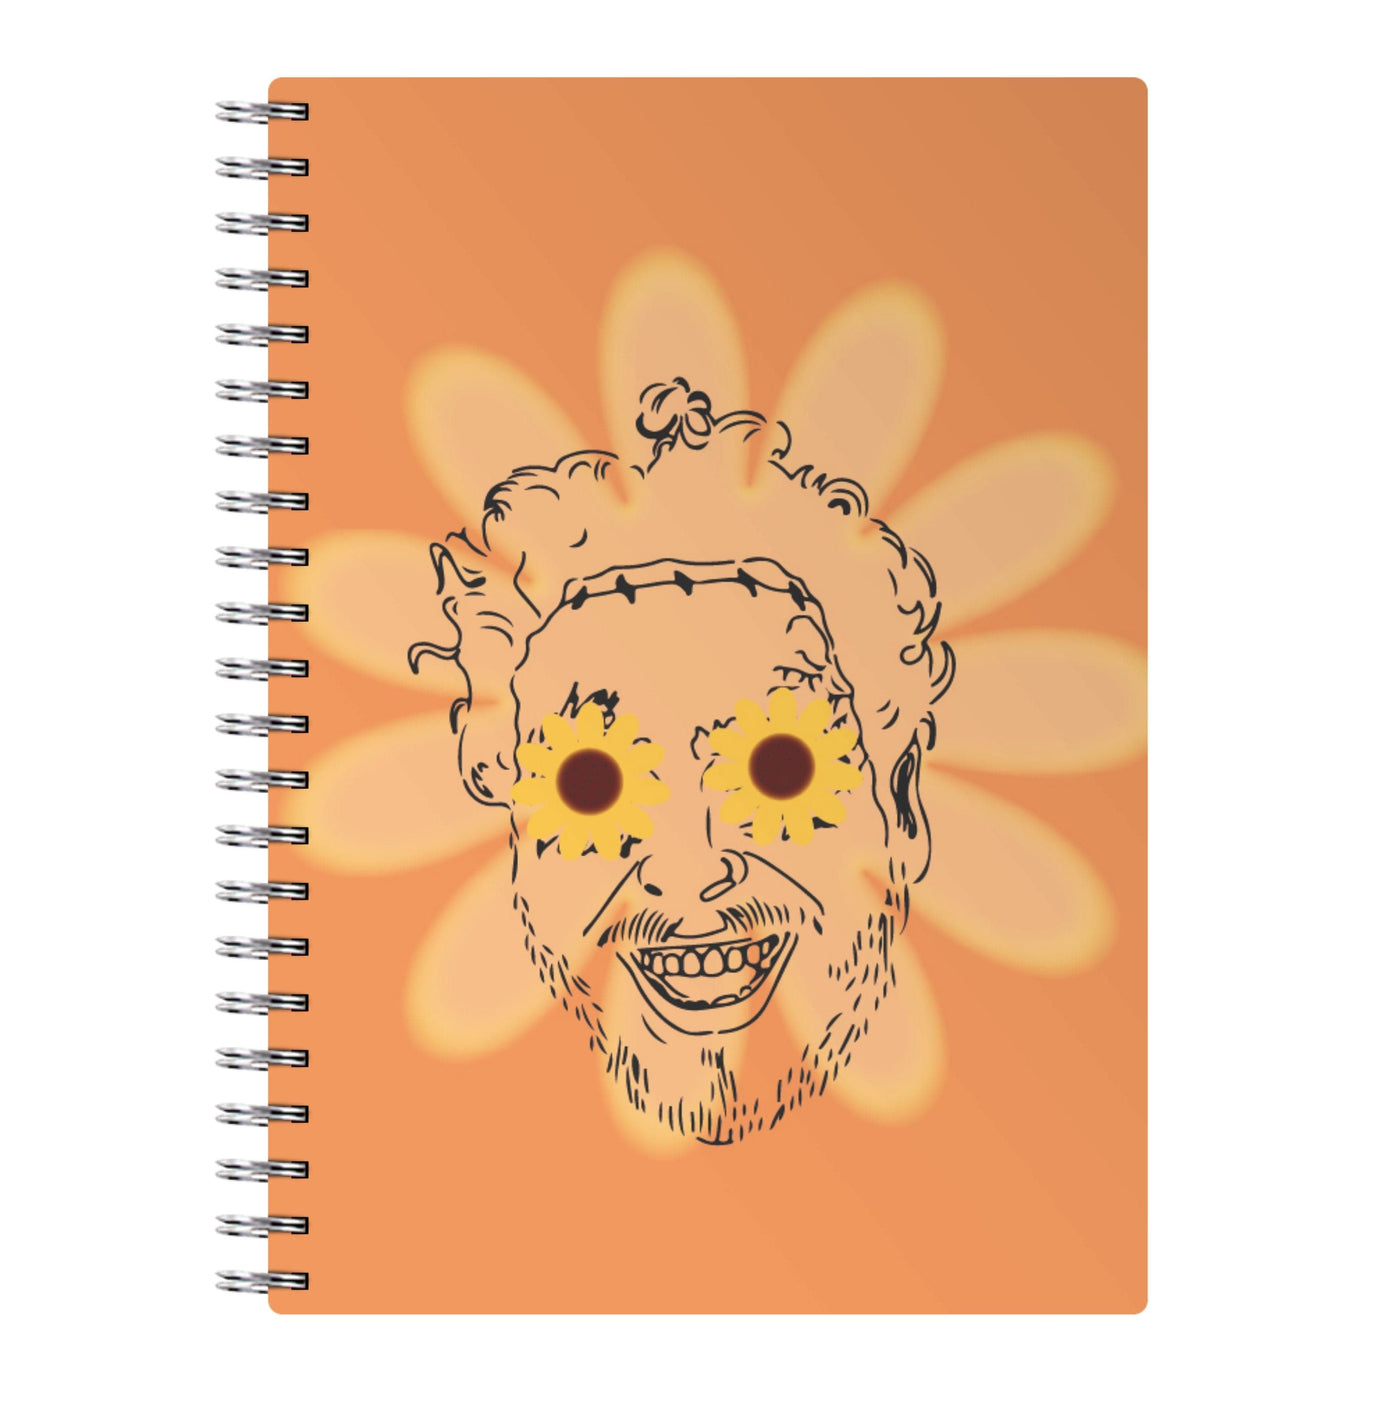 Flowers - Post Malone Notebook